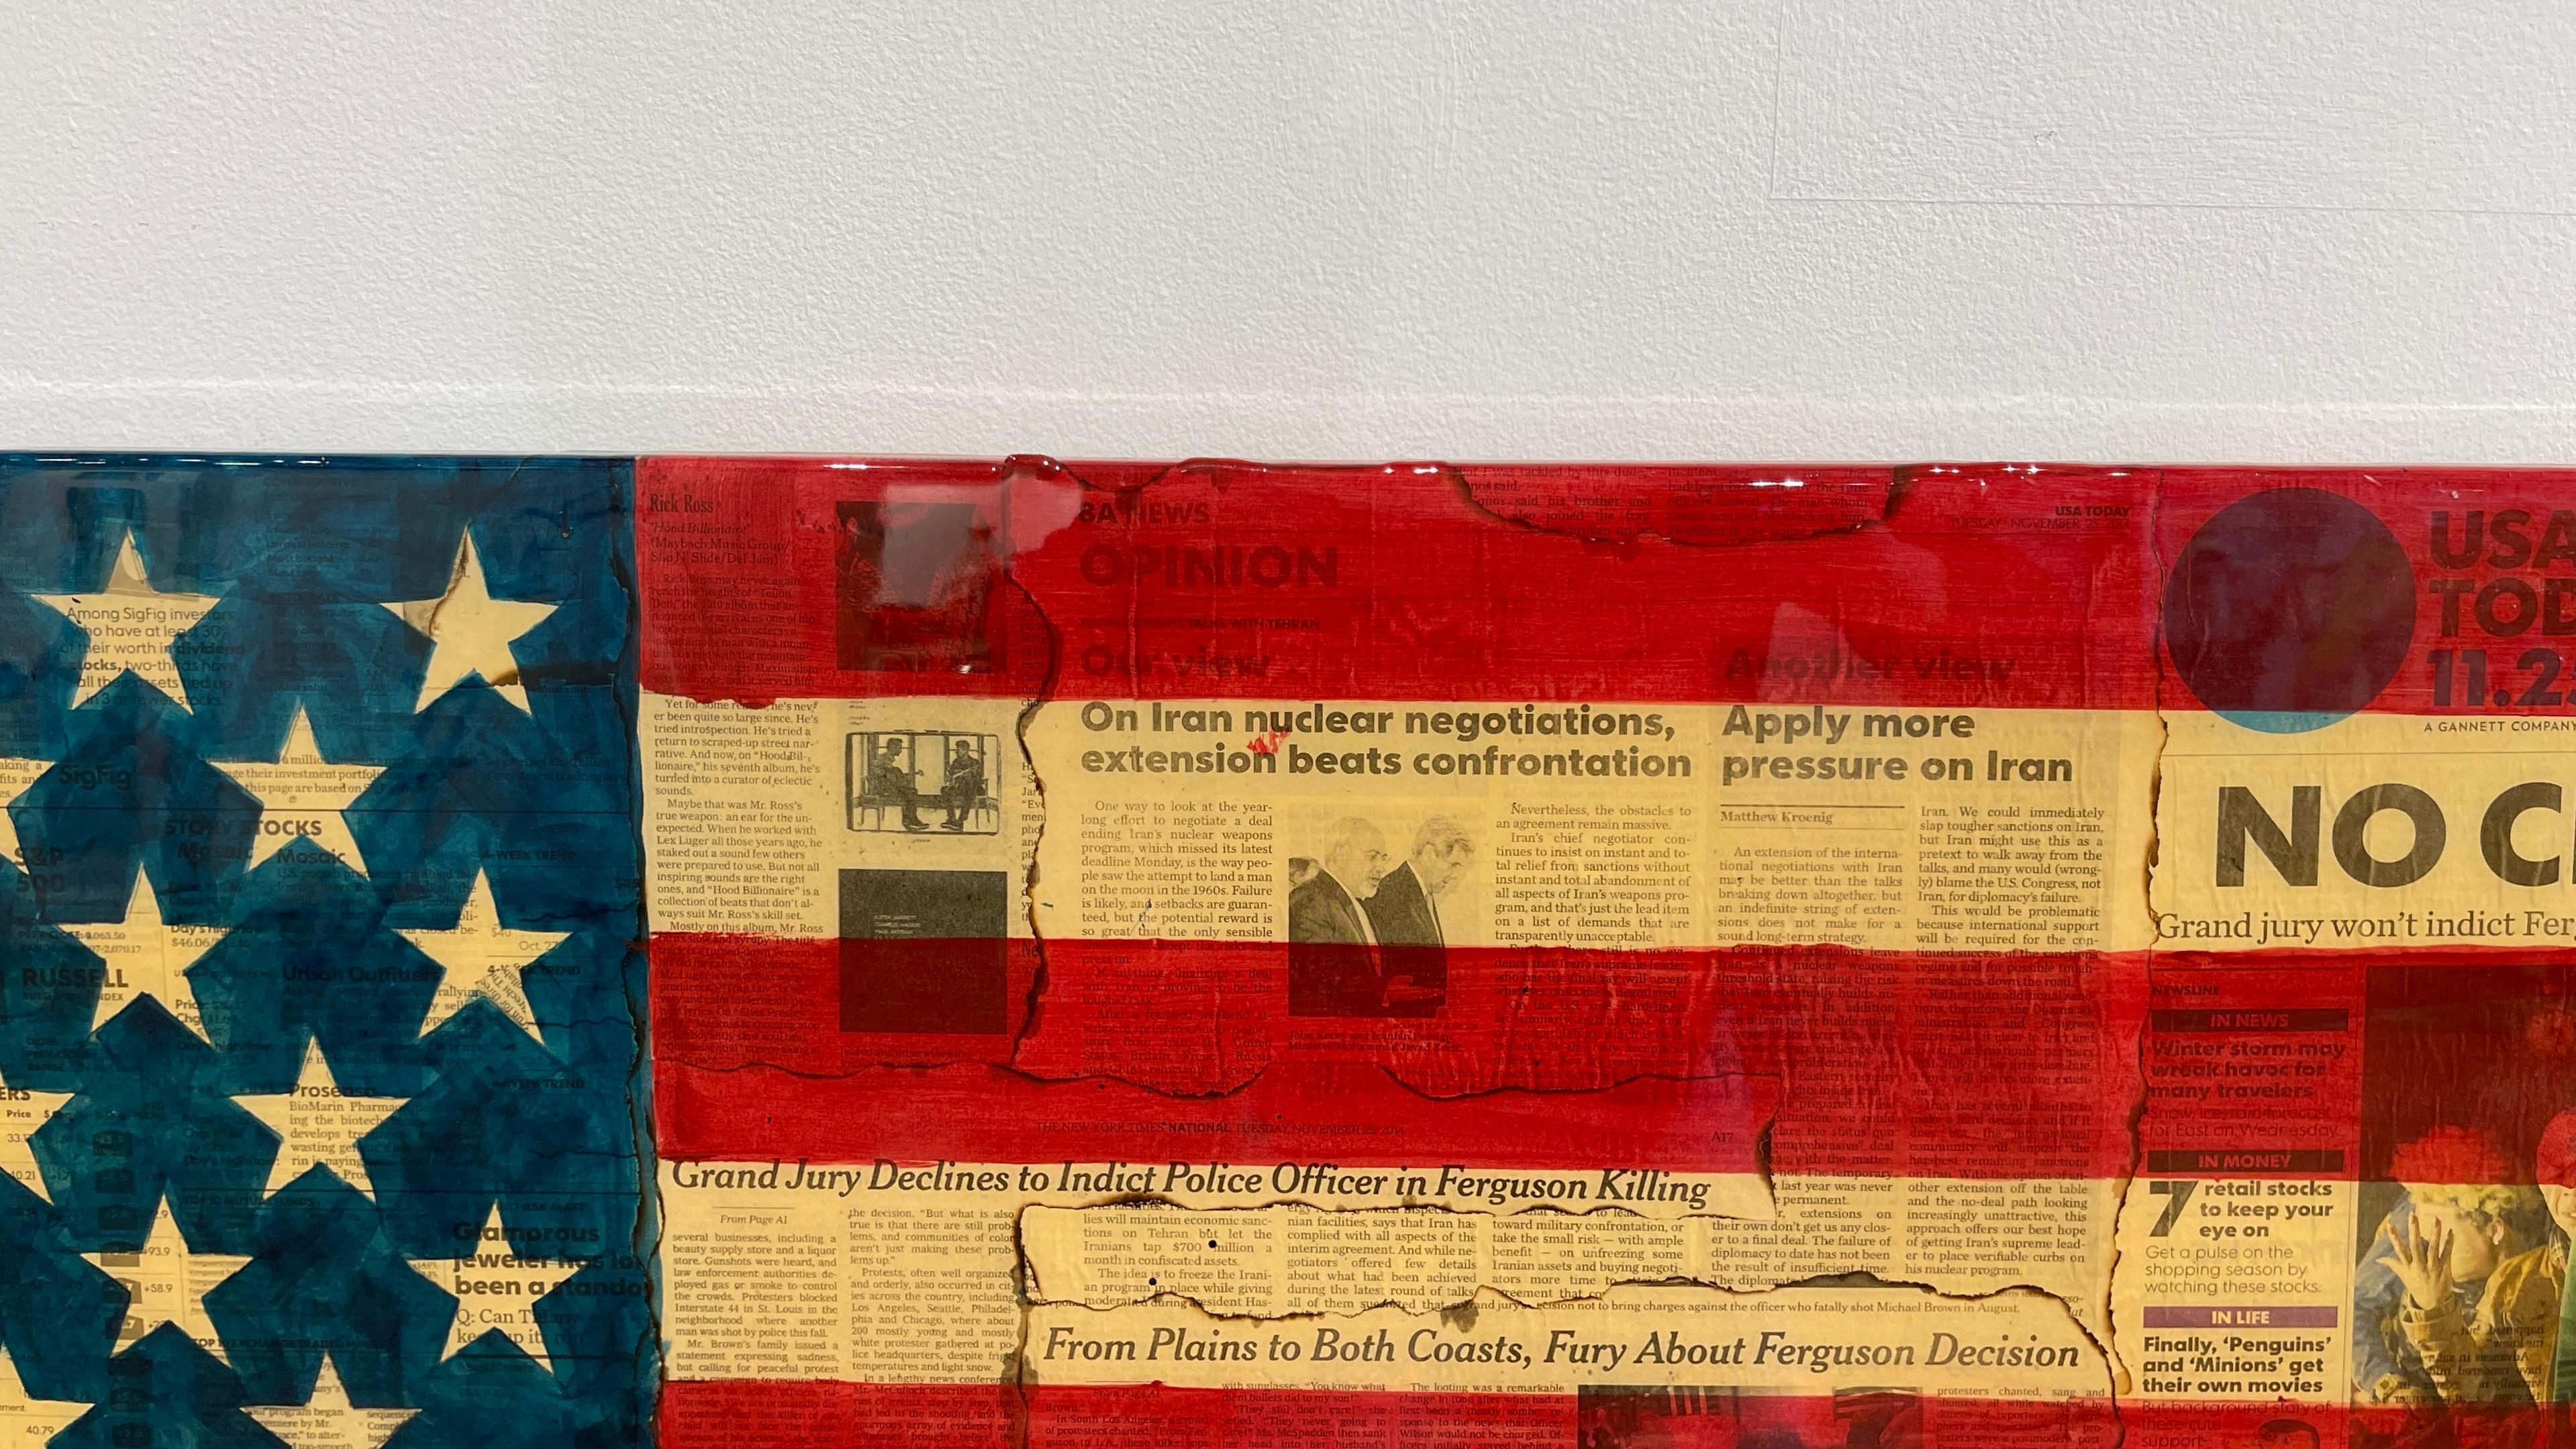 No Charges - American Flag Painting over Vintage Newsprint Photo Collage - Contemporary Mixed Media Art by Patrick Burns